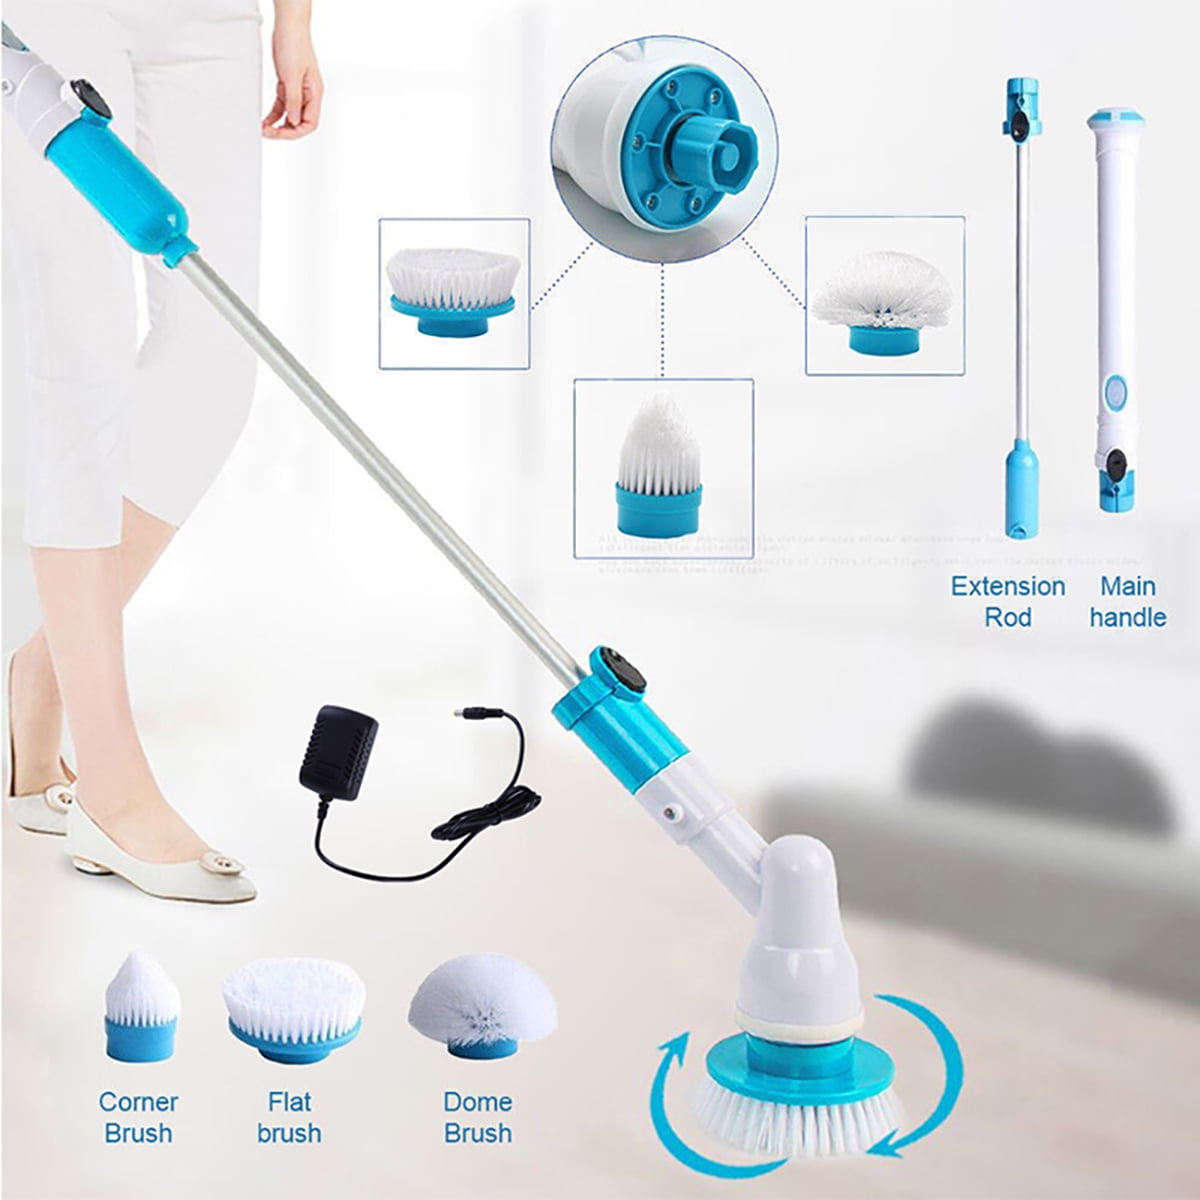 Electric Spin Scrubber with 5 Replaceable Cleaning Brush Heads, 360-degree  Cordless Scrubber for Bathroom, Tub, Tile, Floor, and Car - Adjustable